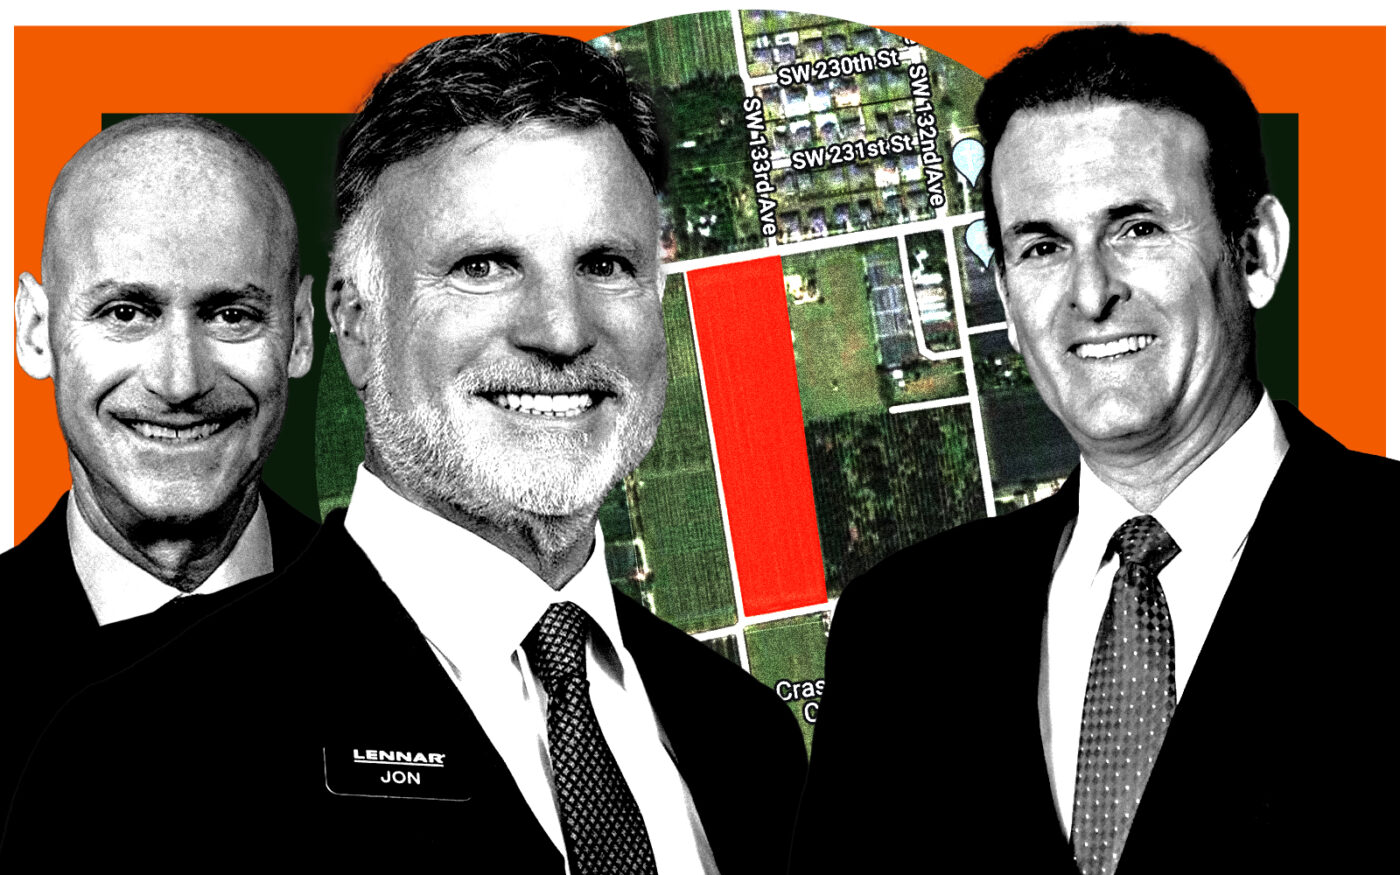 From left: Lennar’s co-CEOs Rick Beckwitt and Jon Jaffe along with Executive Chairman Stuart Miller and an aerial view of the Naranja site on the northwest corner of Southwest 236th Street and Southwest 133rd Avenue (Getty, Google Maps, Lennar)